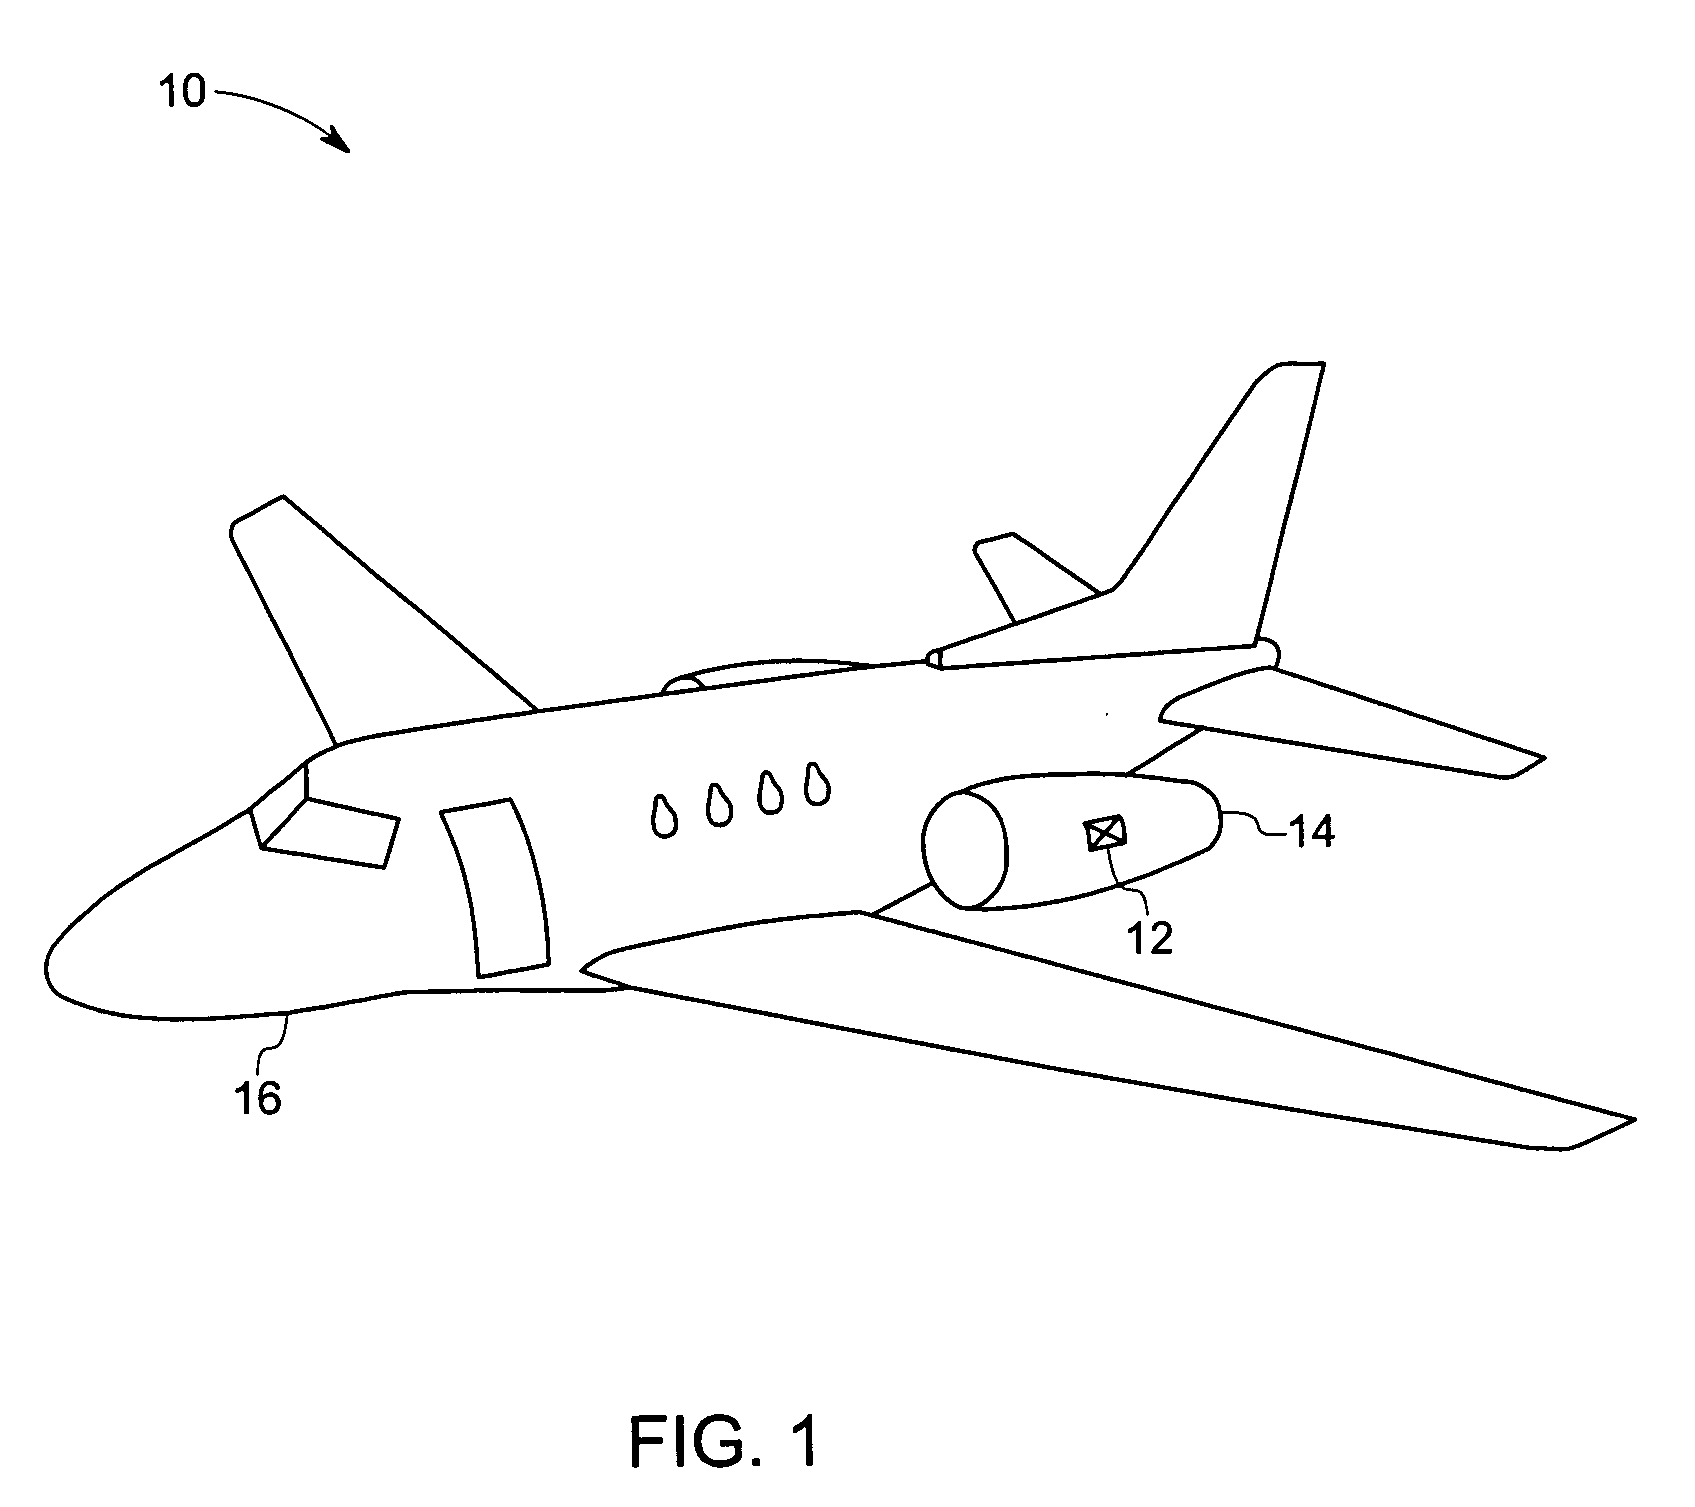 System and method for estimating turbine engine deterioration rate with noisy data